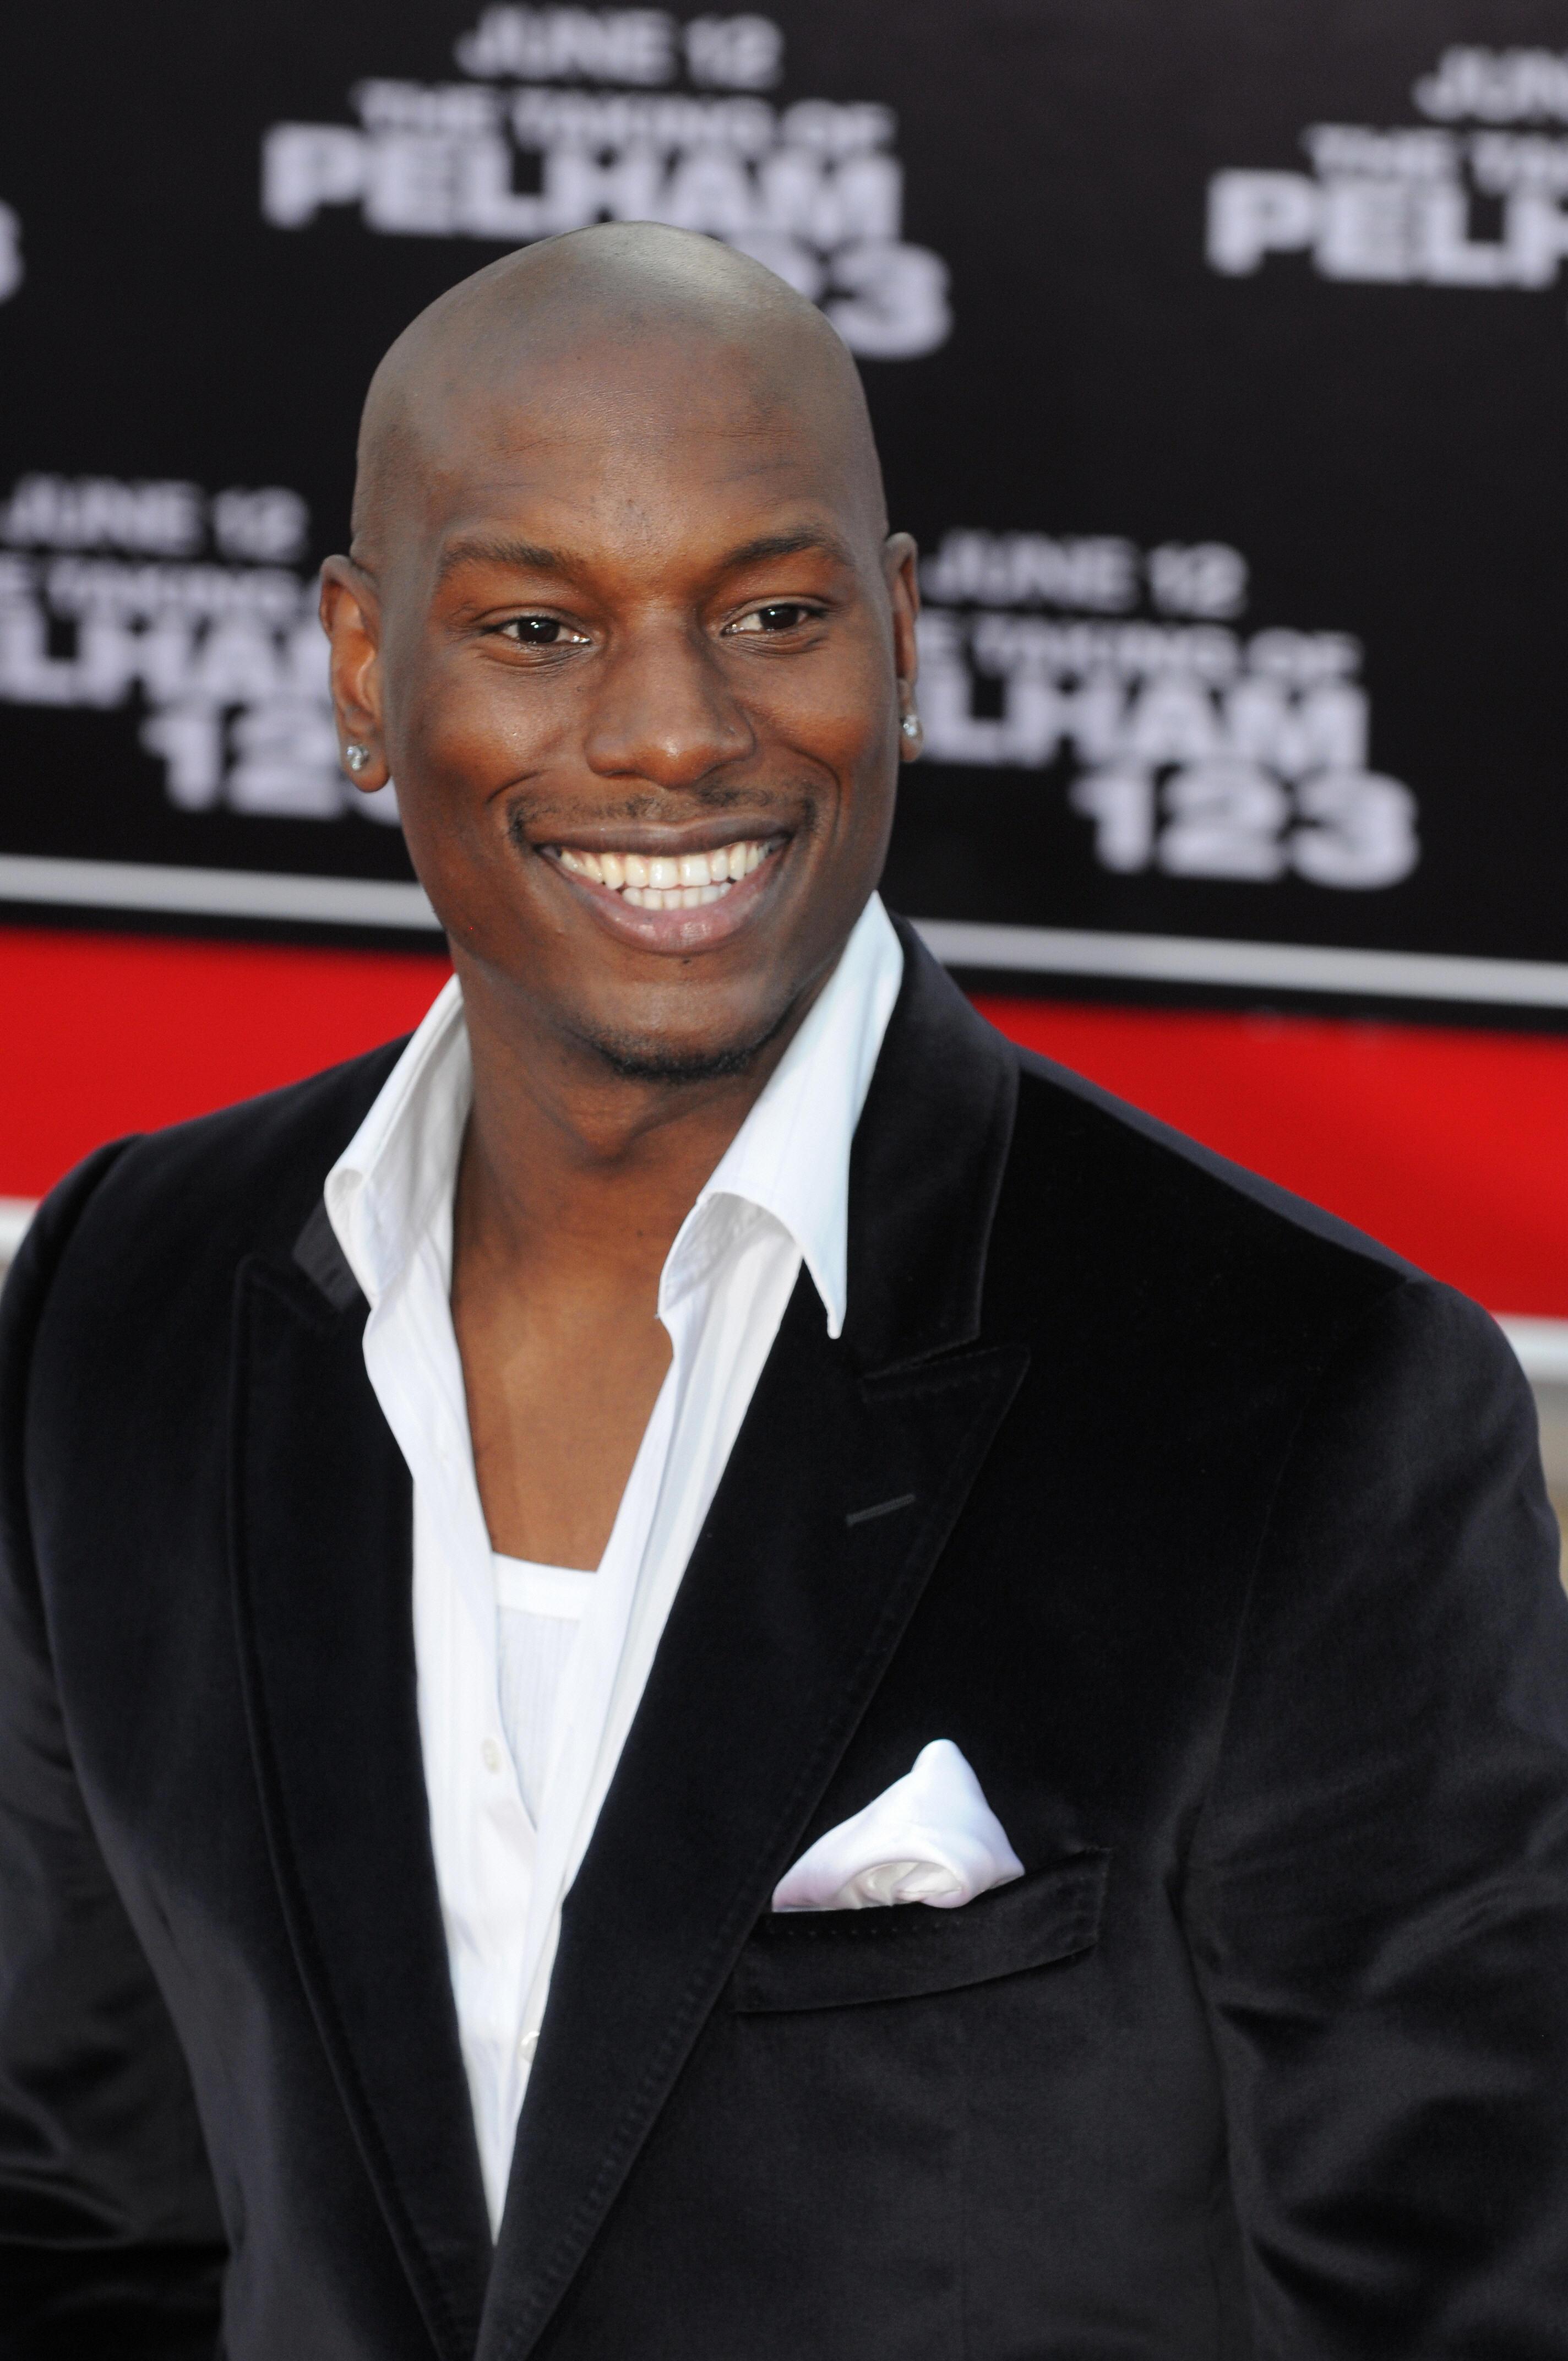 Actor and rap music artist Tyrese Gibson